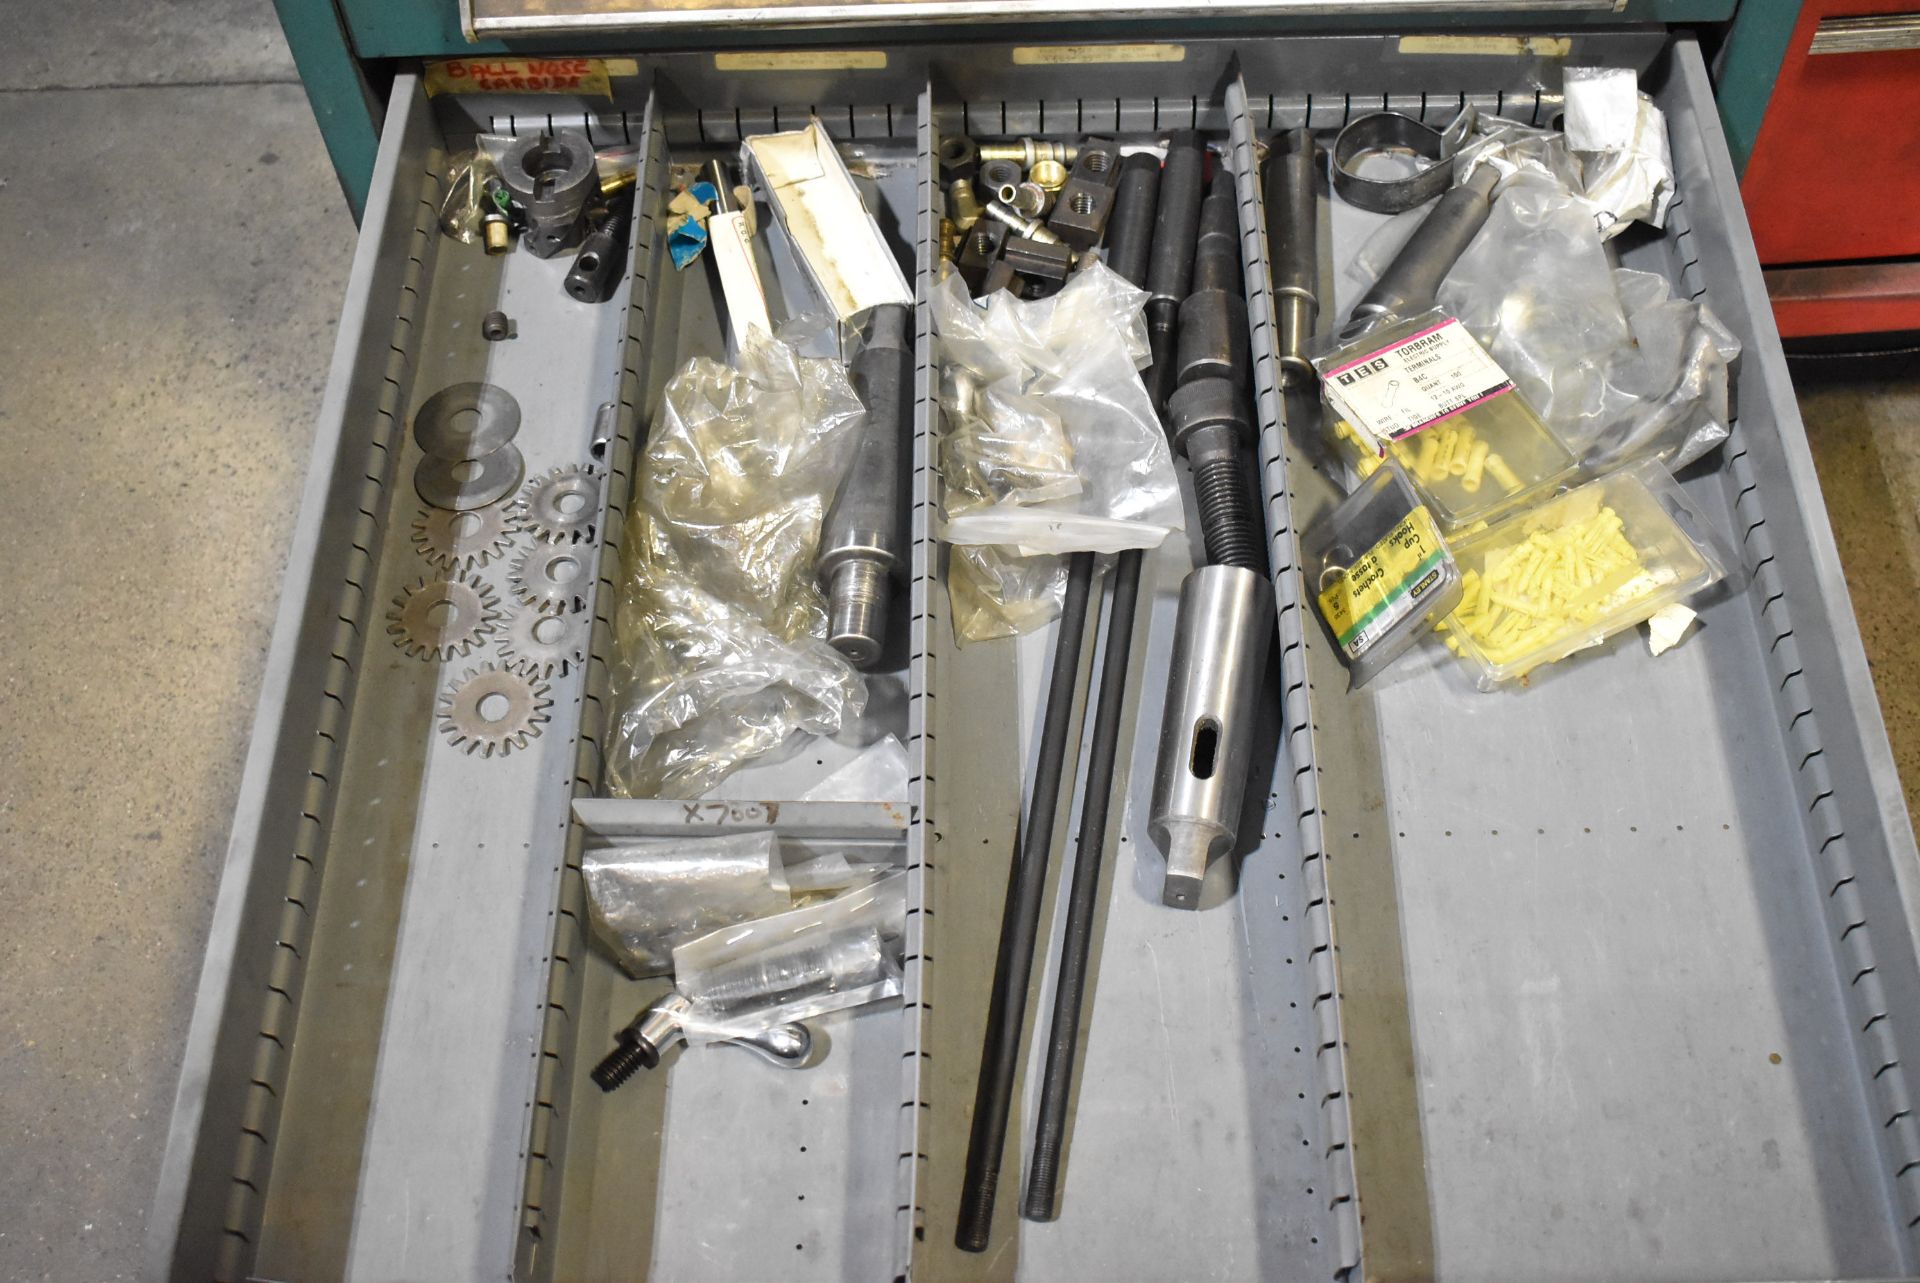 LOT/ CONTENTS OF TOOL CABINET - INCLUDING TAPS, REAMERS, DRILLS, SANDING & GRINDING PERISHABLES, - Image 8 of 10